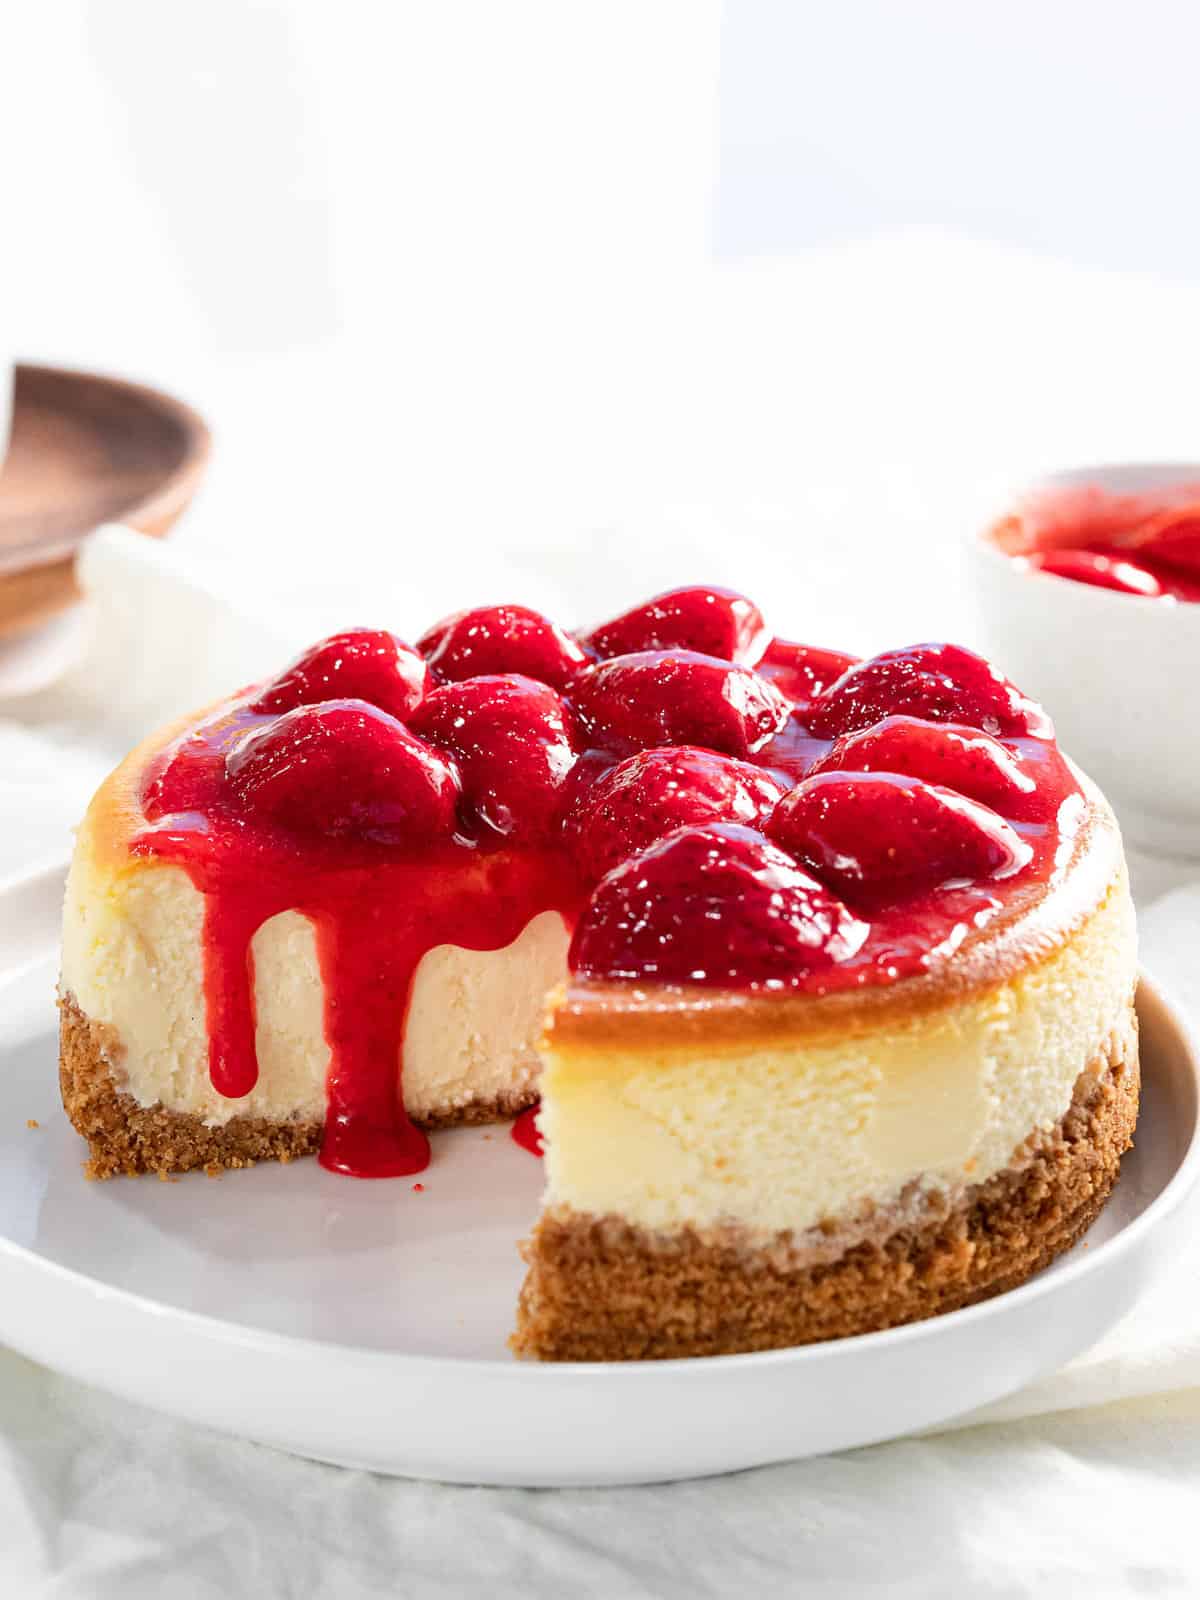 Strawberry cheesecake with strawberry topping and graham cracker crust.